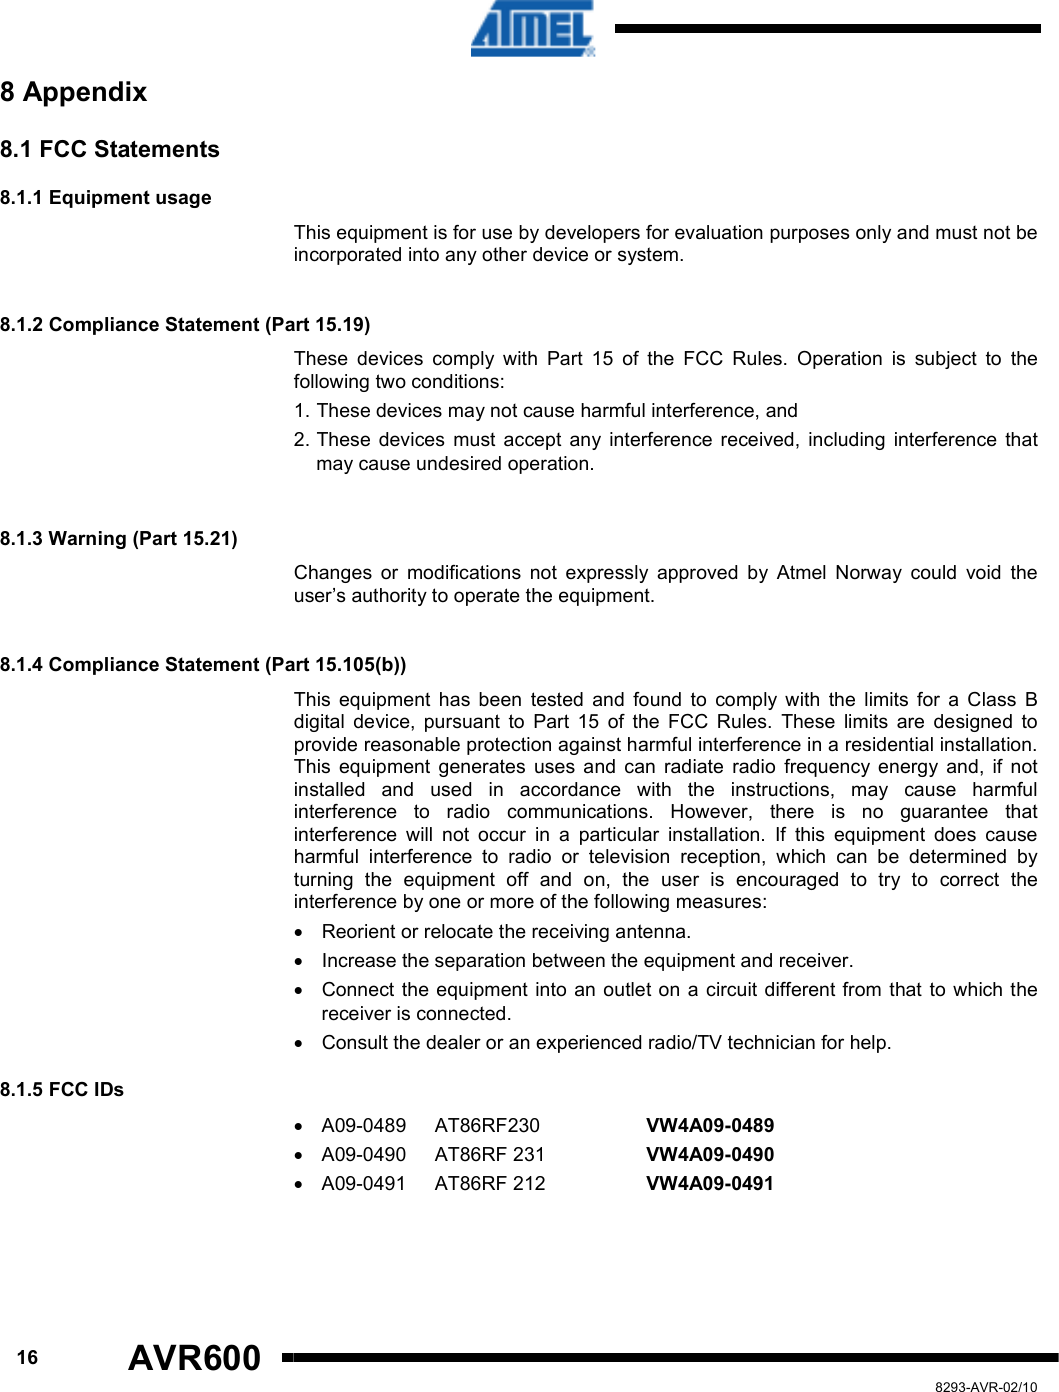      16 AVR600   8293-AVR-02/10 8 Appendix 8.1 FCC Statements  8.1.1 Equipment usage This equipment is for use by developers for evaluation purposes only and must not be incorporated into any other device or system.   8.1.2 Compliance Statement (Part 15.19)  These  devices  comply  with  Part  15  of  the  FCC  Rules.  Operation  is  subject  to  the following two conditions:  1. These devices may not cause harmful interference, and  2. These  devices  must  accept  any  interference  received,  including  interference  that may cause undesired operation.   8.1.3 Warning (Part 15.21)  Changes  or  modifications  not  expressly  approved  by  Atmel  Norway  could  void  the user’s authority to operate the equipment.   8.1.4 Compliance Statement (Part 15.105(b))  This  equipment  has  been  tested  and  found  to  comply  with  the  limits  for  a  Class  B digital  device,  pursuant  to  Part  15  of  the  FCC  Rules.  These  limits  are  designed  to provide reasonable protection against harmful interference in a residential installation. This  equipment  generates  uses  and  can  radiate  radio  frequency  energy  and,  if  not installed  and  used  in  accordance  with  the  instructions,  may  cause  harmful interference  to  radio  communications.  However,  there  is  no  guarantee  that interference  will  not  occur  in  a  particular  installation.  If  this  equipment  does  cause harmful  interference  to  radio  or  television  reception,  which  can  be  determined  by turning  the  equipment  off  and  on,  the  user  is  encouraged  to  try  to  correct  the interference by one or more of the following measures:  •  Reorient or relocate the receiving antenna.  •  Increase the separation between the equipment and receiver.  •  Connect  the equipment into an outlet on a circuit different from that to which the receiver is connected.  •  Consult the dealer or an experienced radio/TV technician for help. 8.1.5 FCC IDs  •  A09-0489  AT86RF230    VW4A09-0489 •  A09-0490  AT86RF 231    VW4A09-0490 •  A09-0491  AT86RF 212    VW4A09-0491     